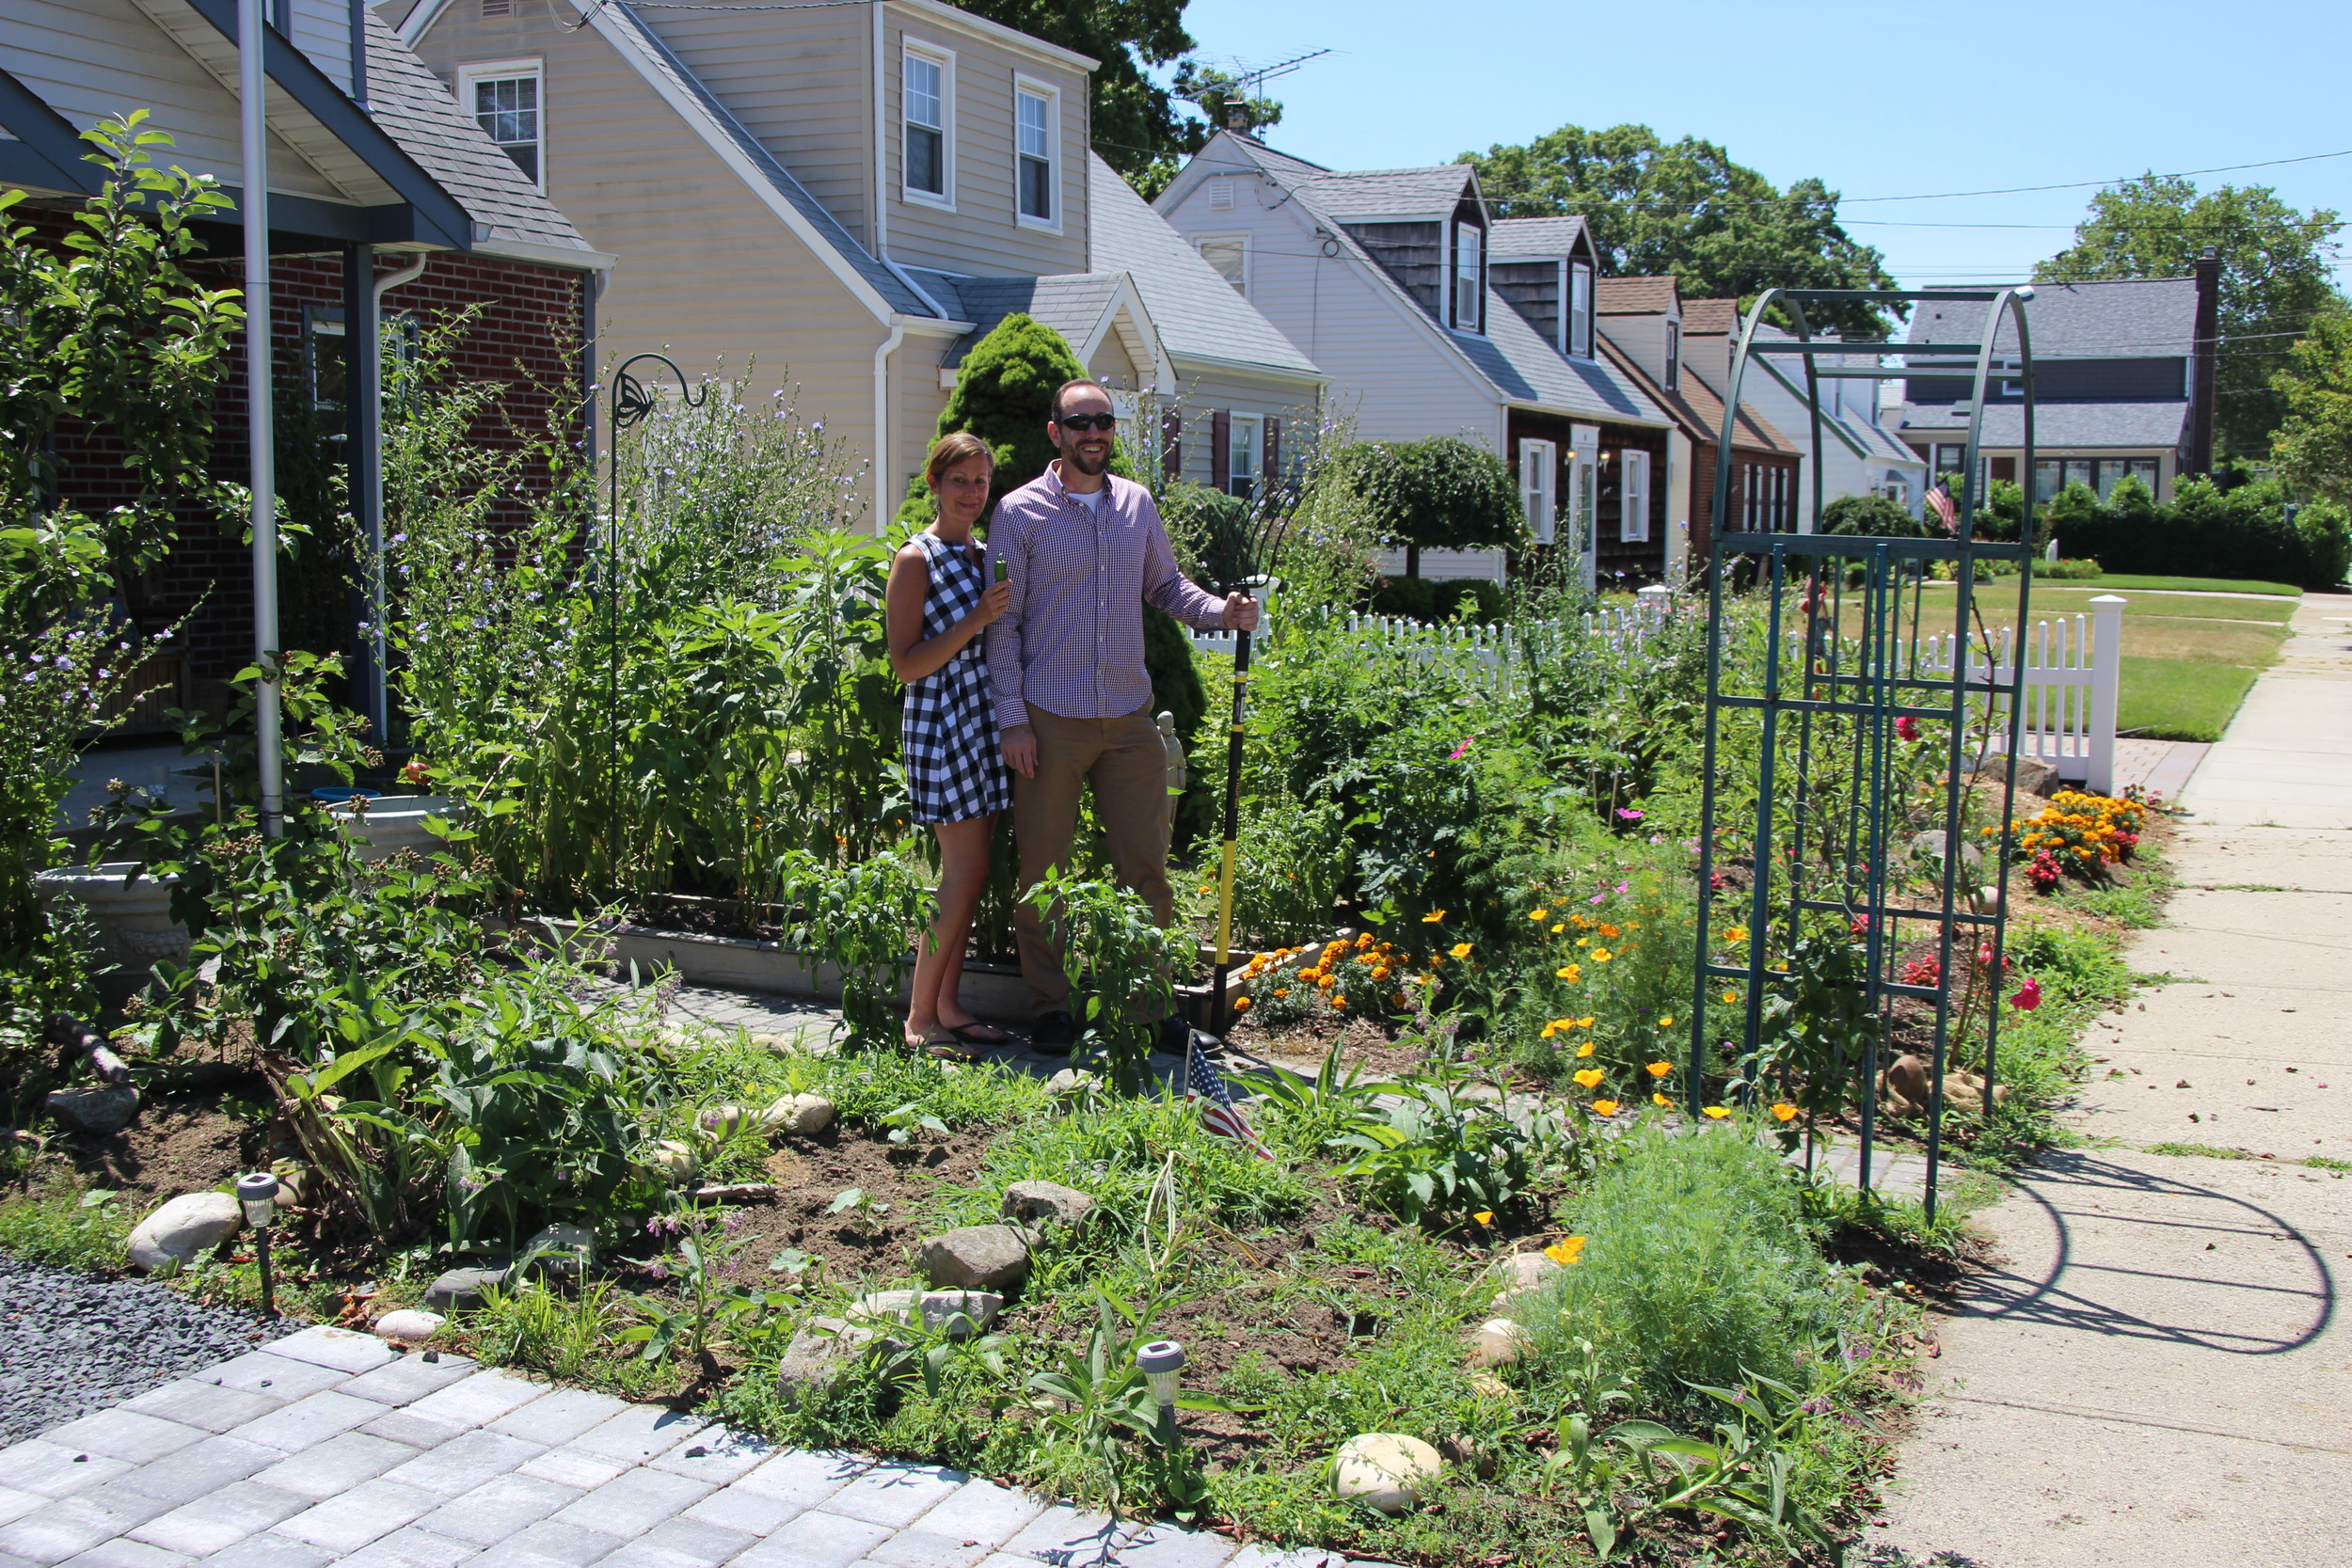 Mary and Vincent Grasso transformed their front yard into an agricultural ecosystem, designed to minimize waste and produce food year-round.